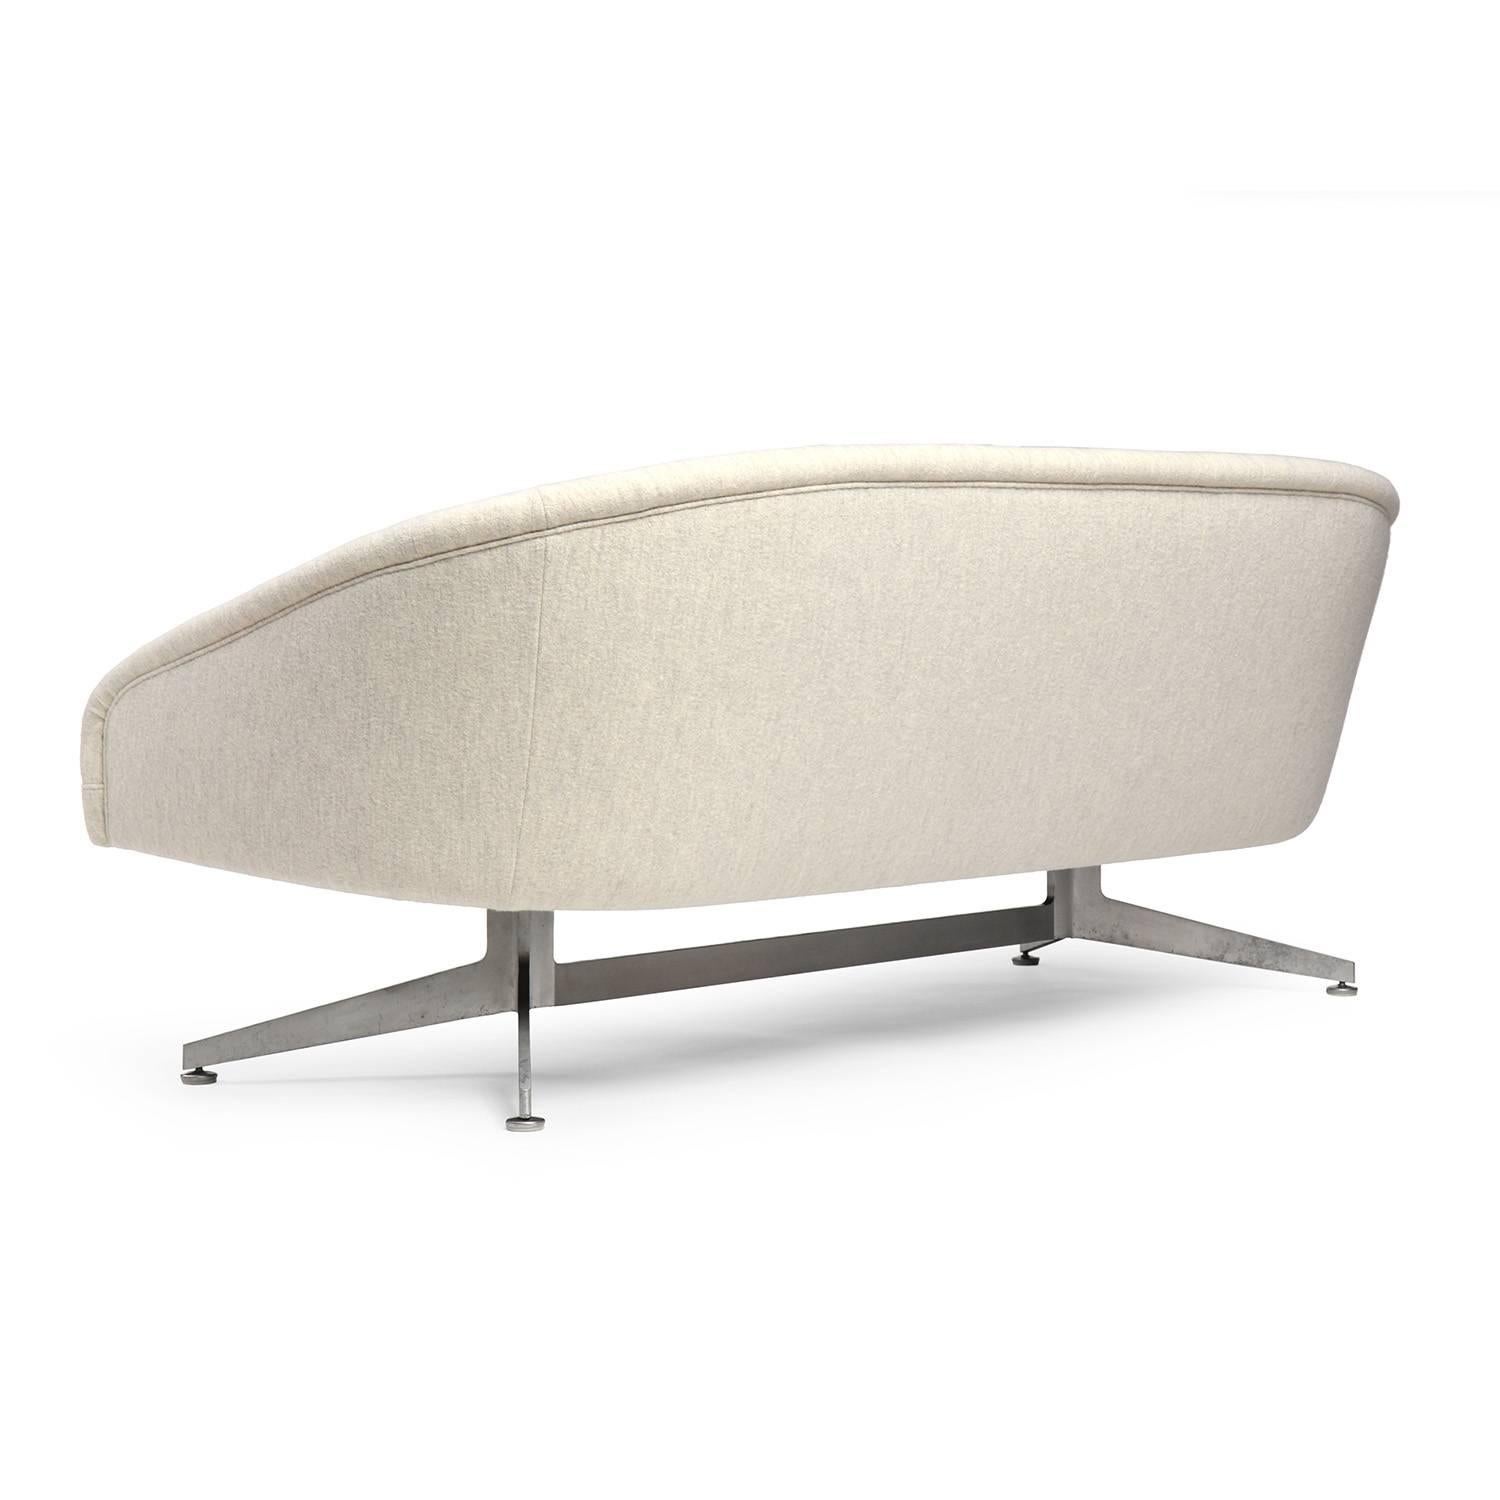 A modernist and sculptural barrel back sofa having tapered arms floating on a satin aluminum double Y-form legged base.